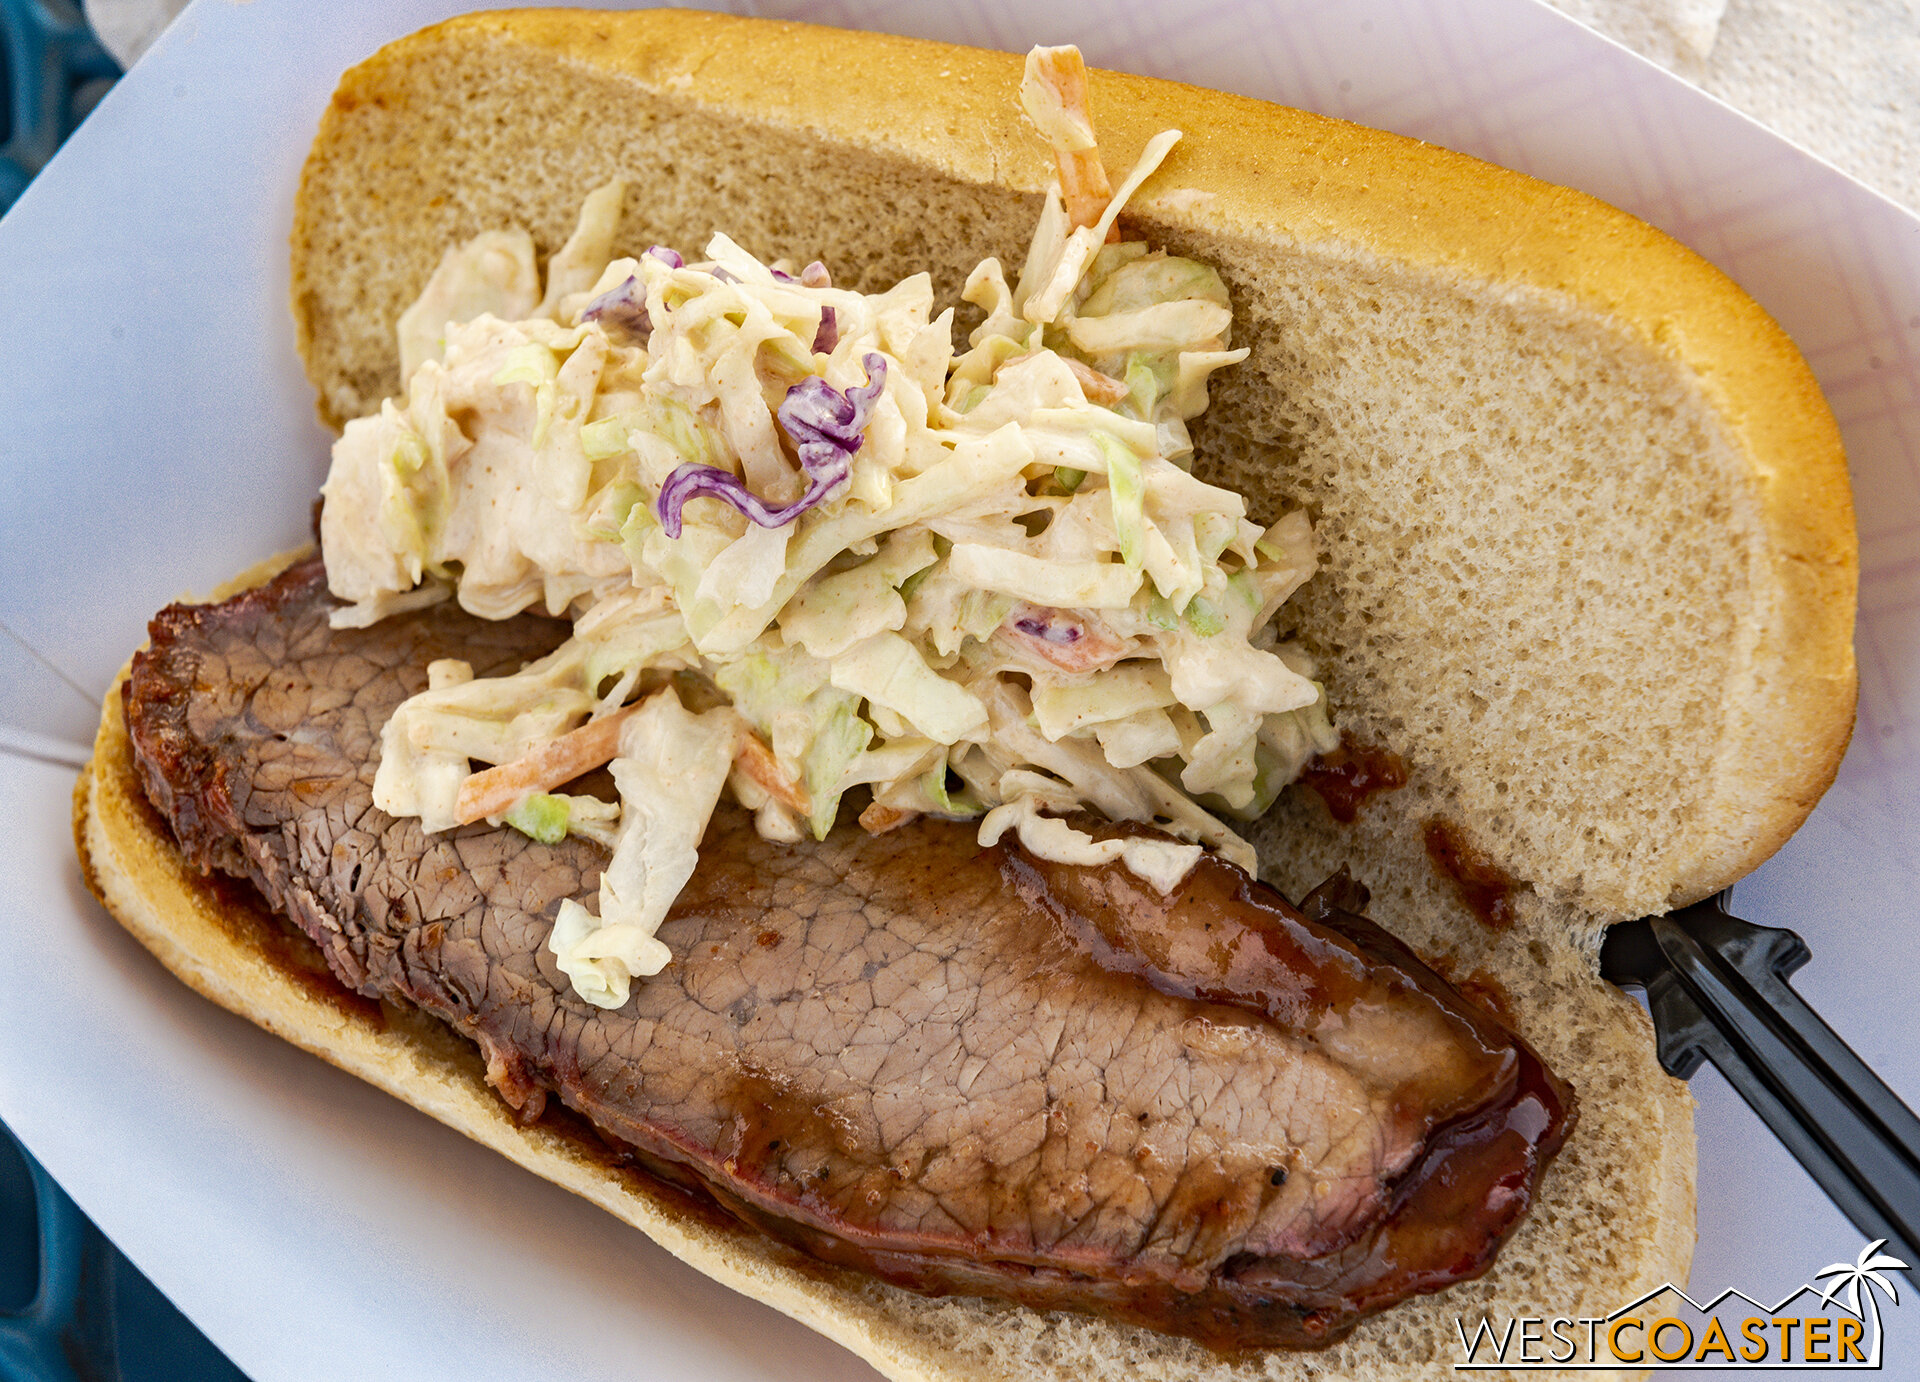  Slow Smoked Brisket Sandwich with BBQ Sauce and Cabbage Slaw, at Boardwalk BBQ Booth #1. 